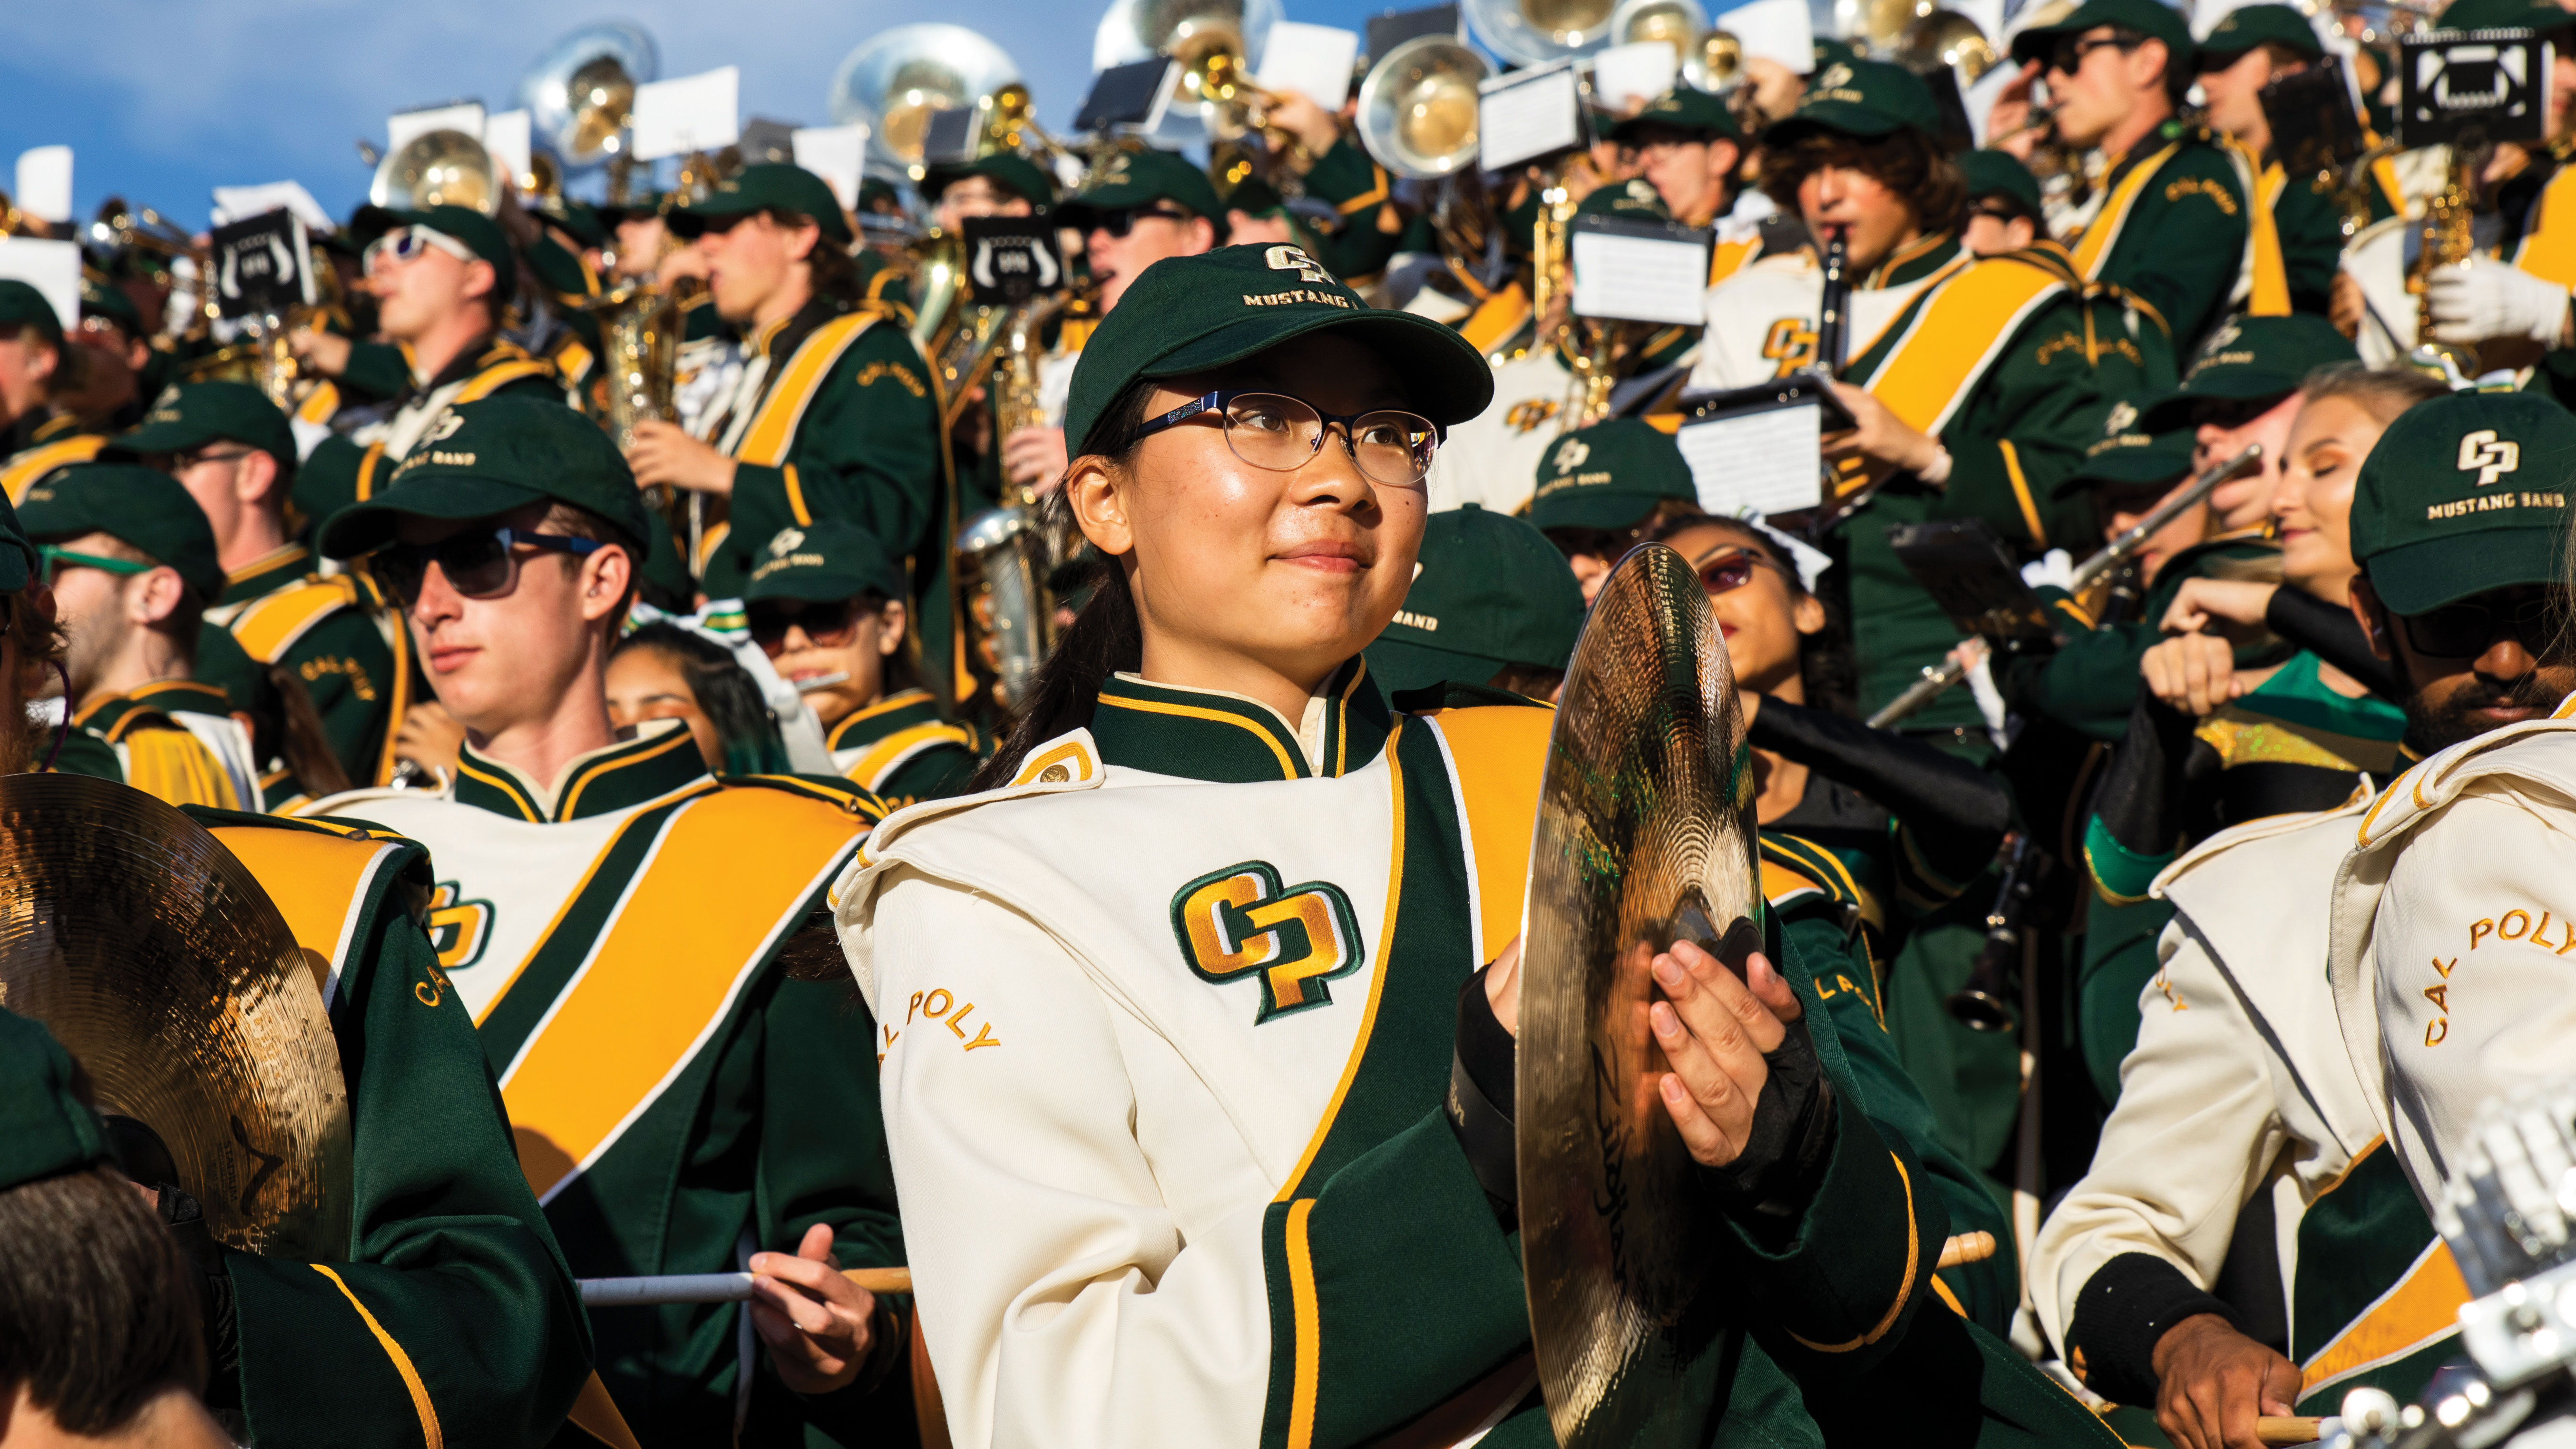 A band member plays the cymbals in the stands of a Cal Poly football game with her fellow musicians behind her.